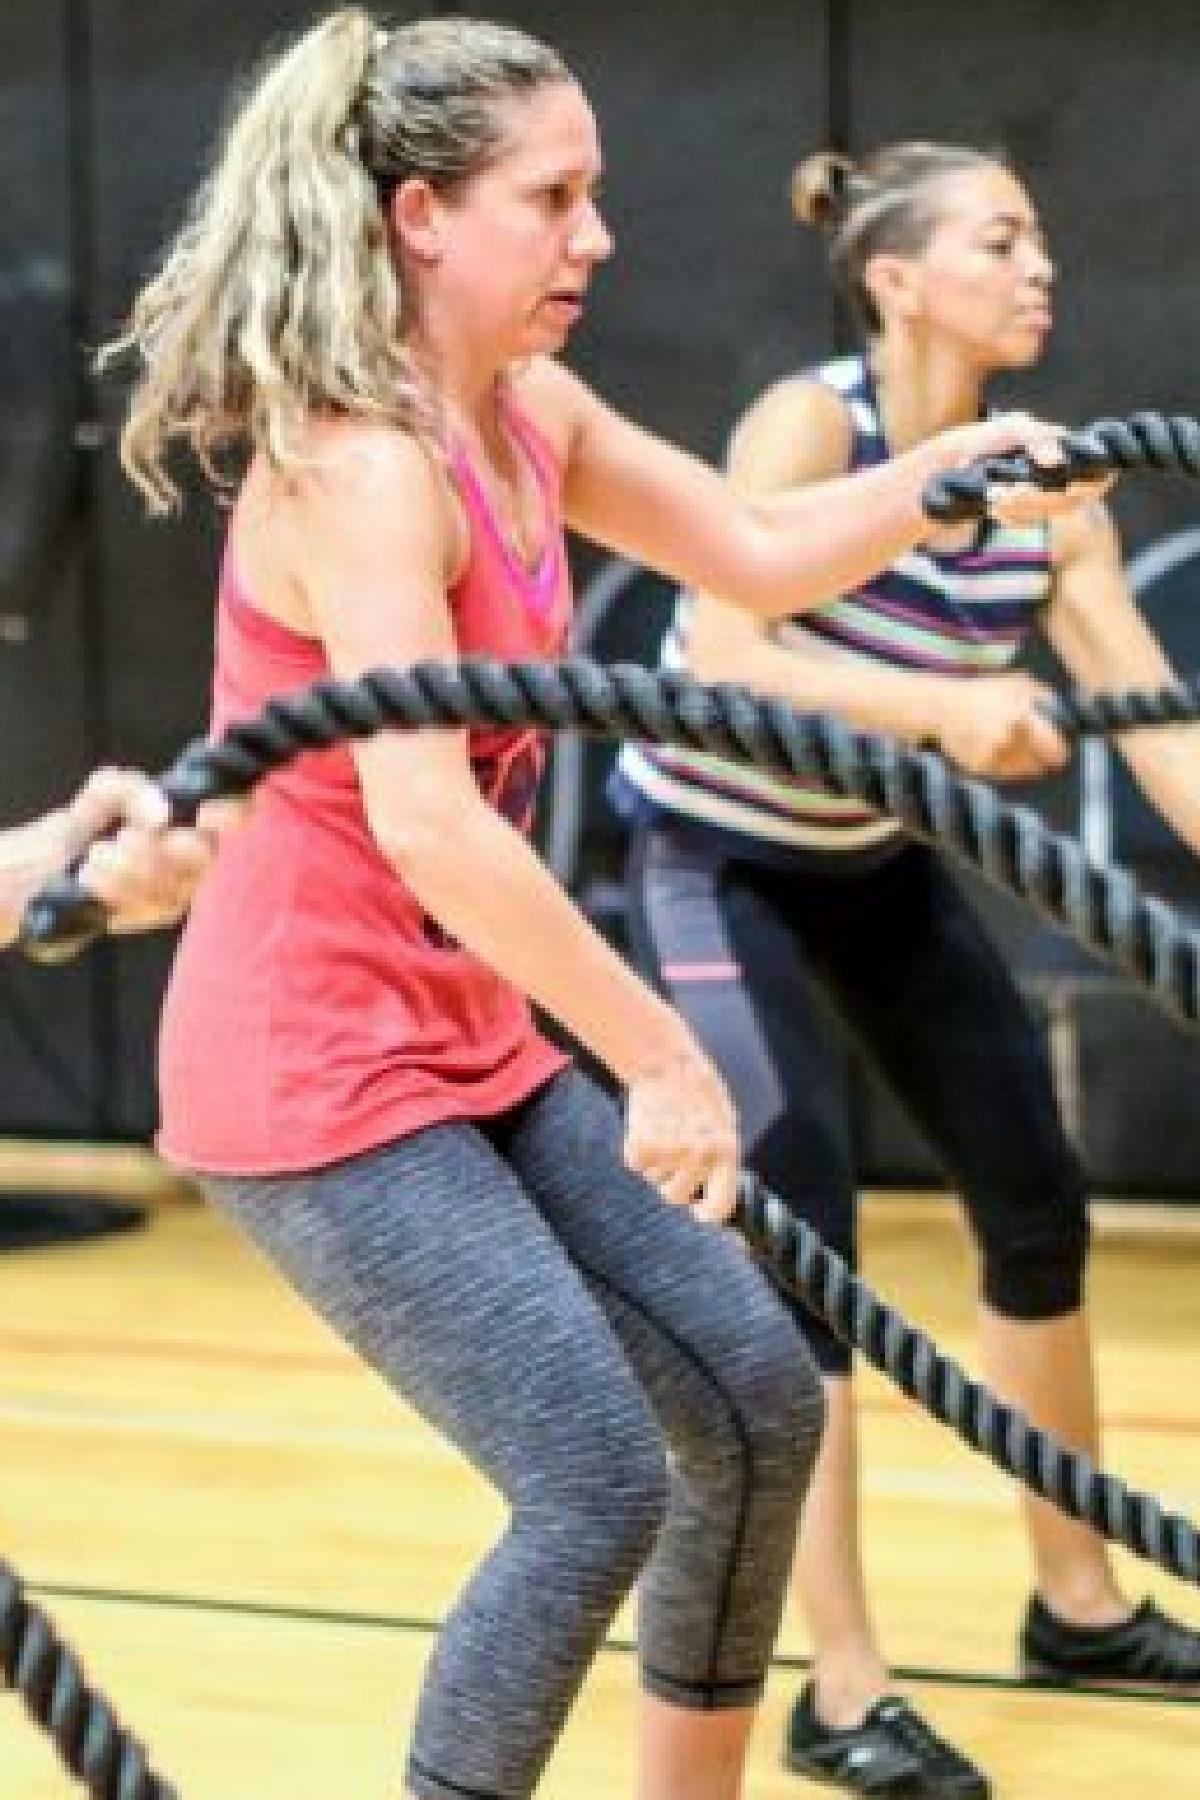 Small Group Training - Ladies using battle rope